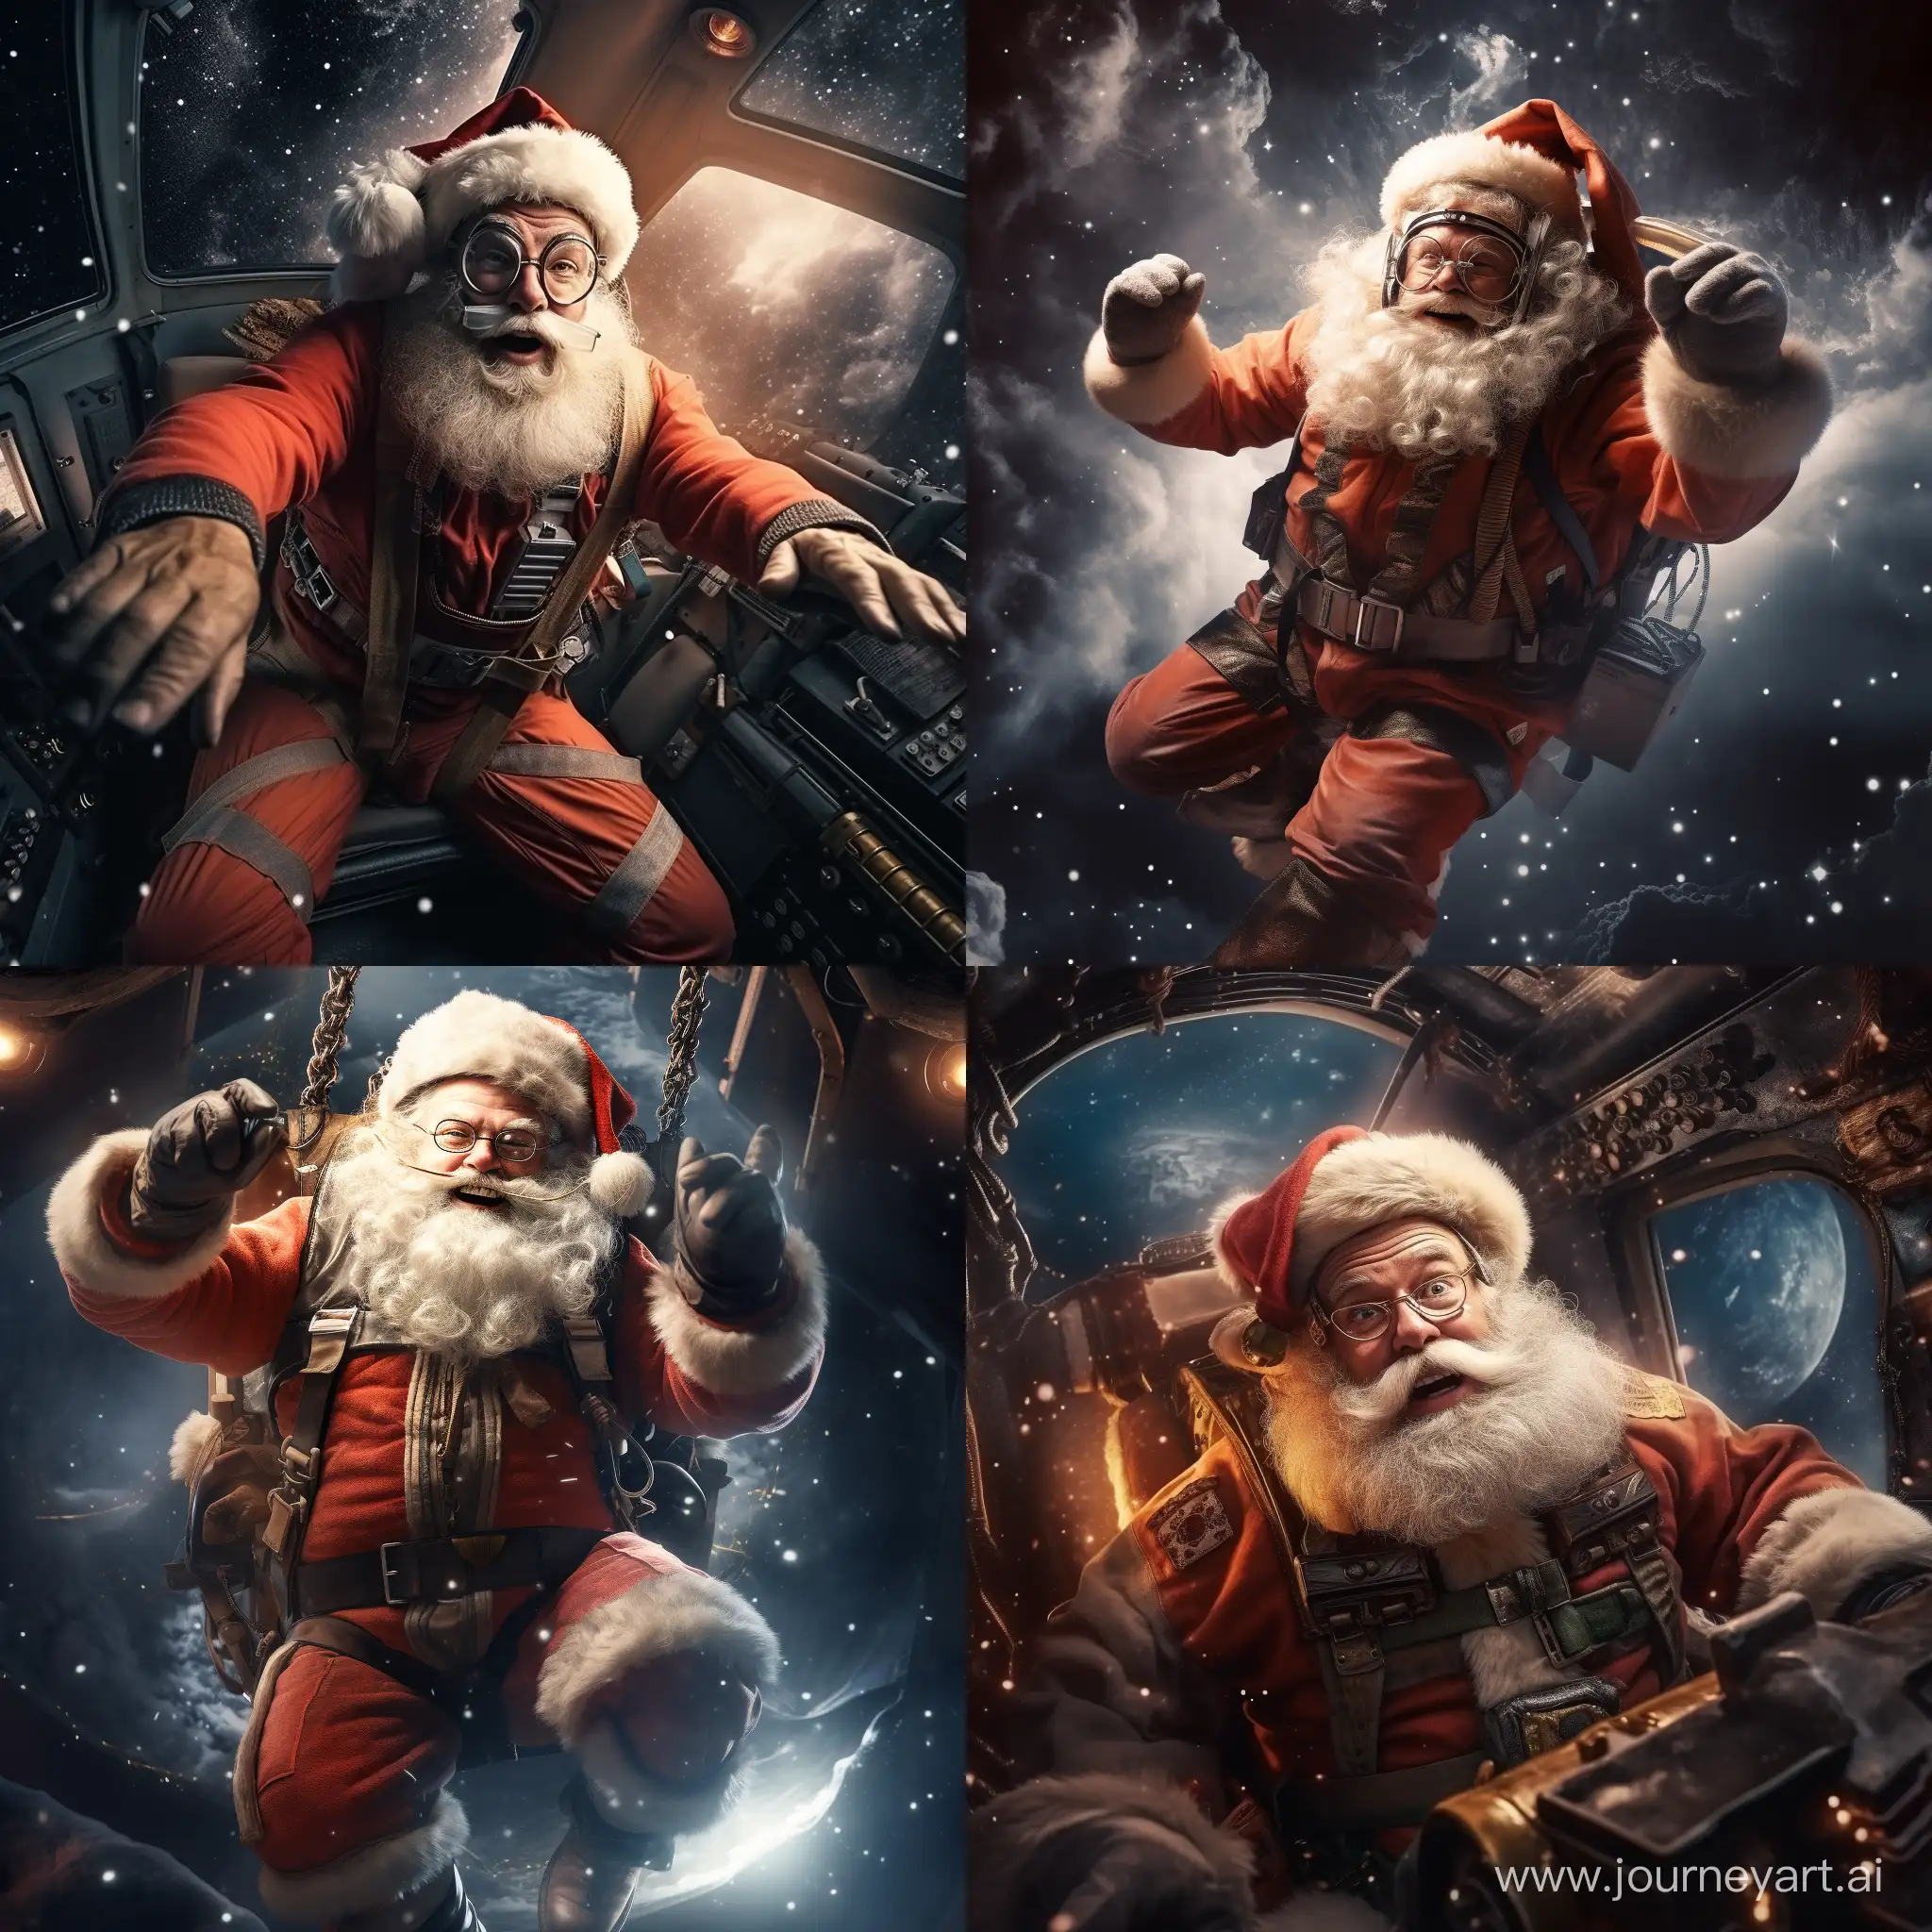 the pilot on the closet is flying across the Galaxy, with the staff of Santa Claus, realistic photo, 